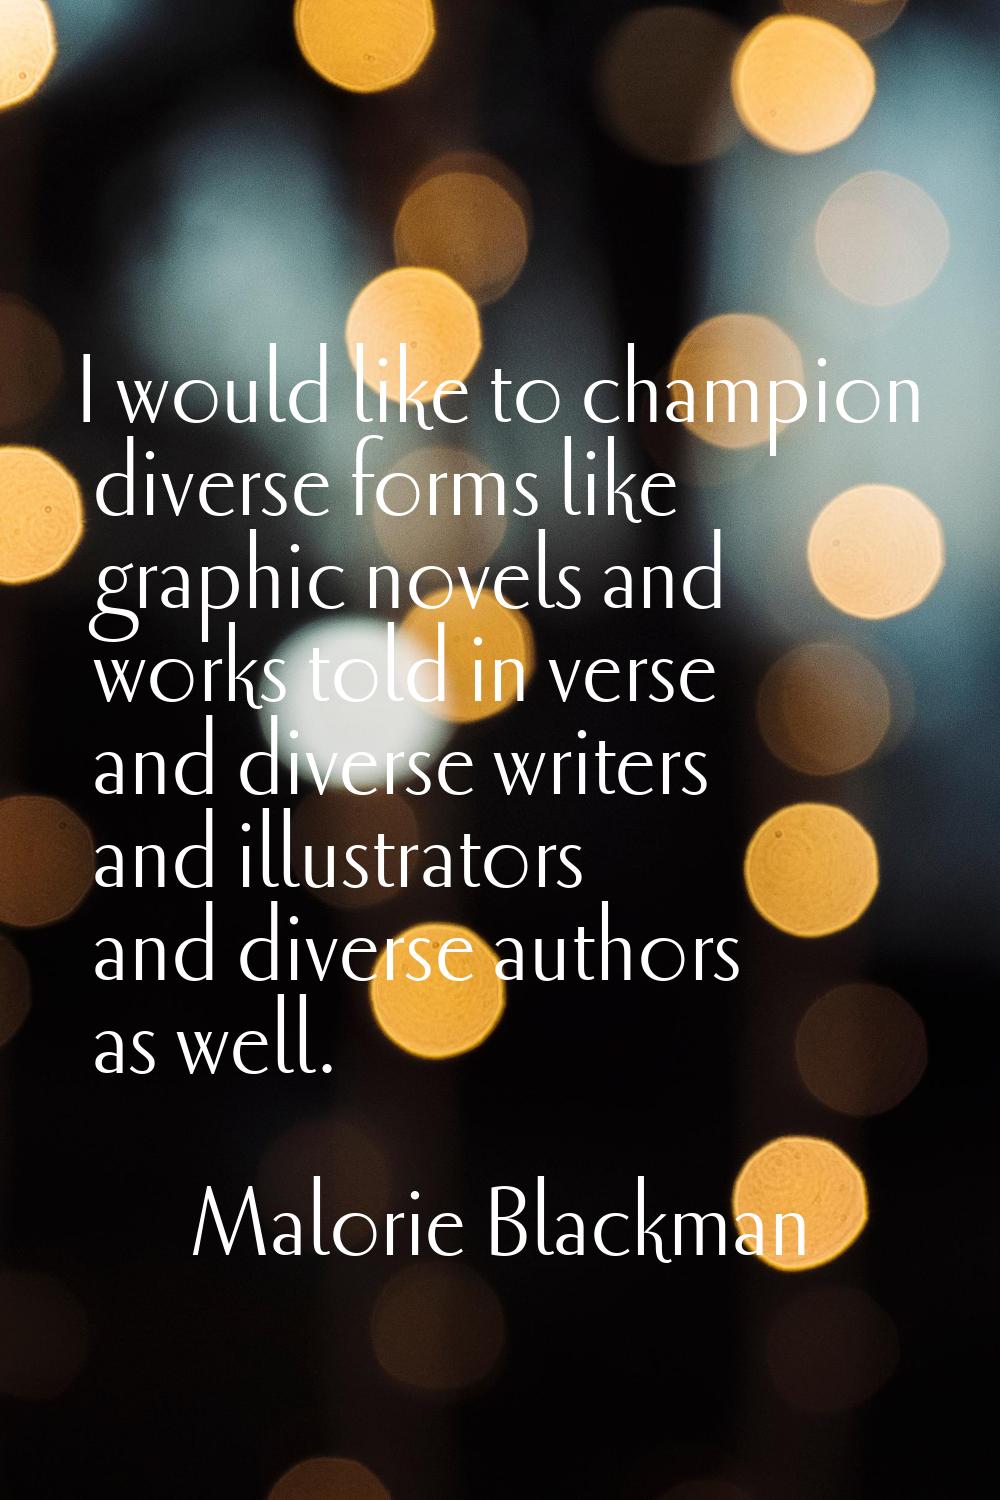 I would like to champion diverse forms like graphic novels and works told in verse and diverse writ